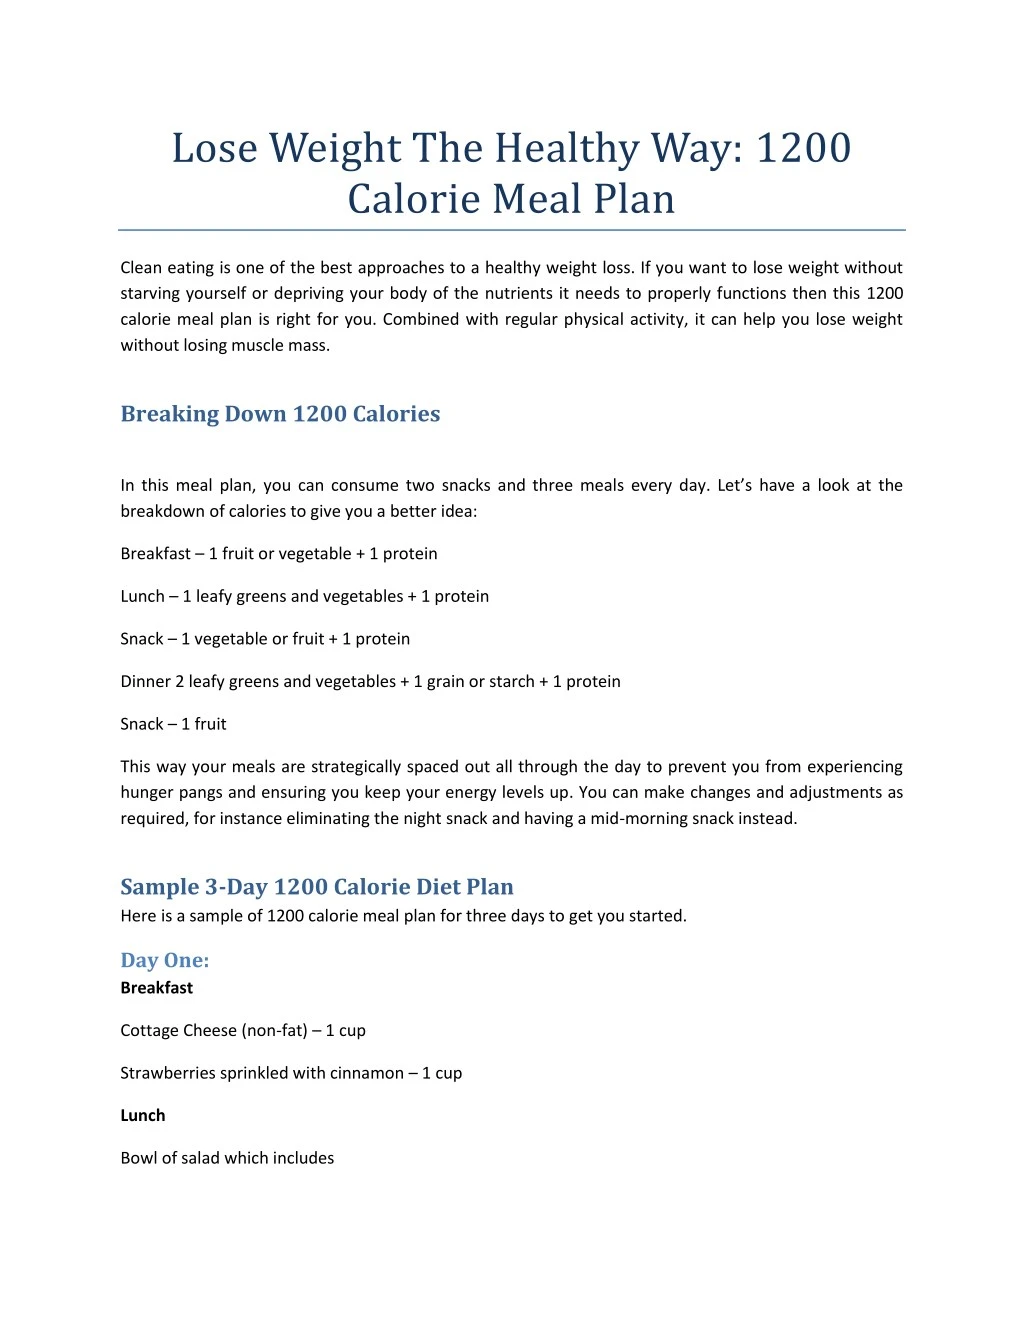 lose weight the healthy way 1200 calorie meal plan